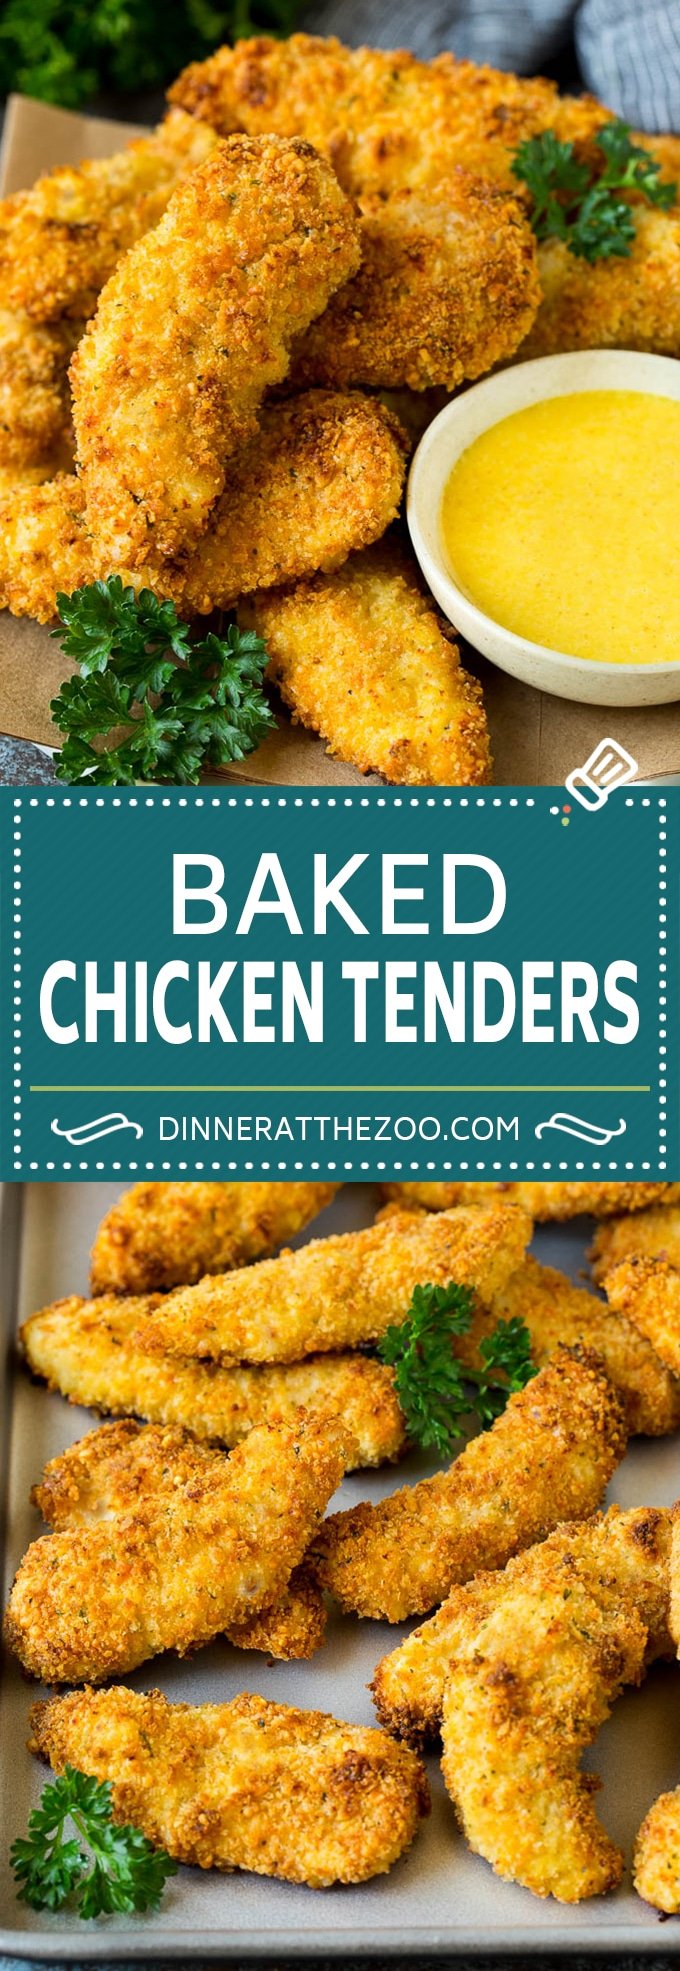 These baked chicken tenders are coated in breadcrumbs, spices and parmesan cheese, then oven baked to golden brown and crispy perfection.